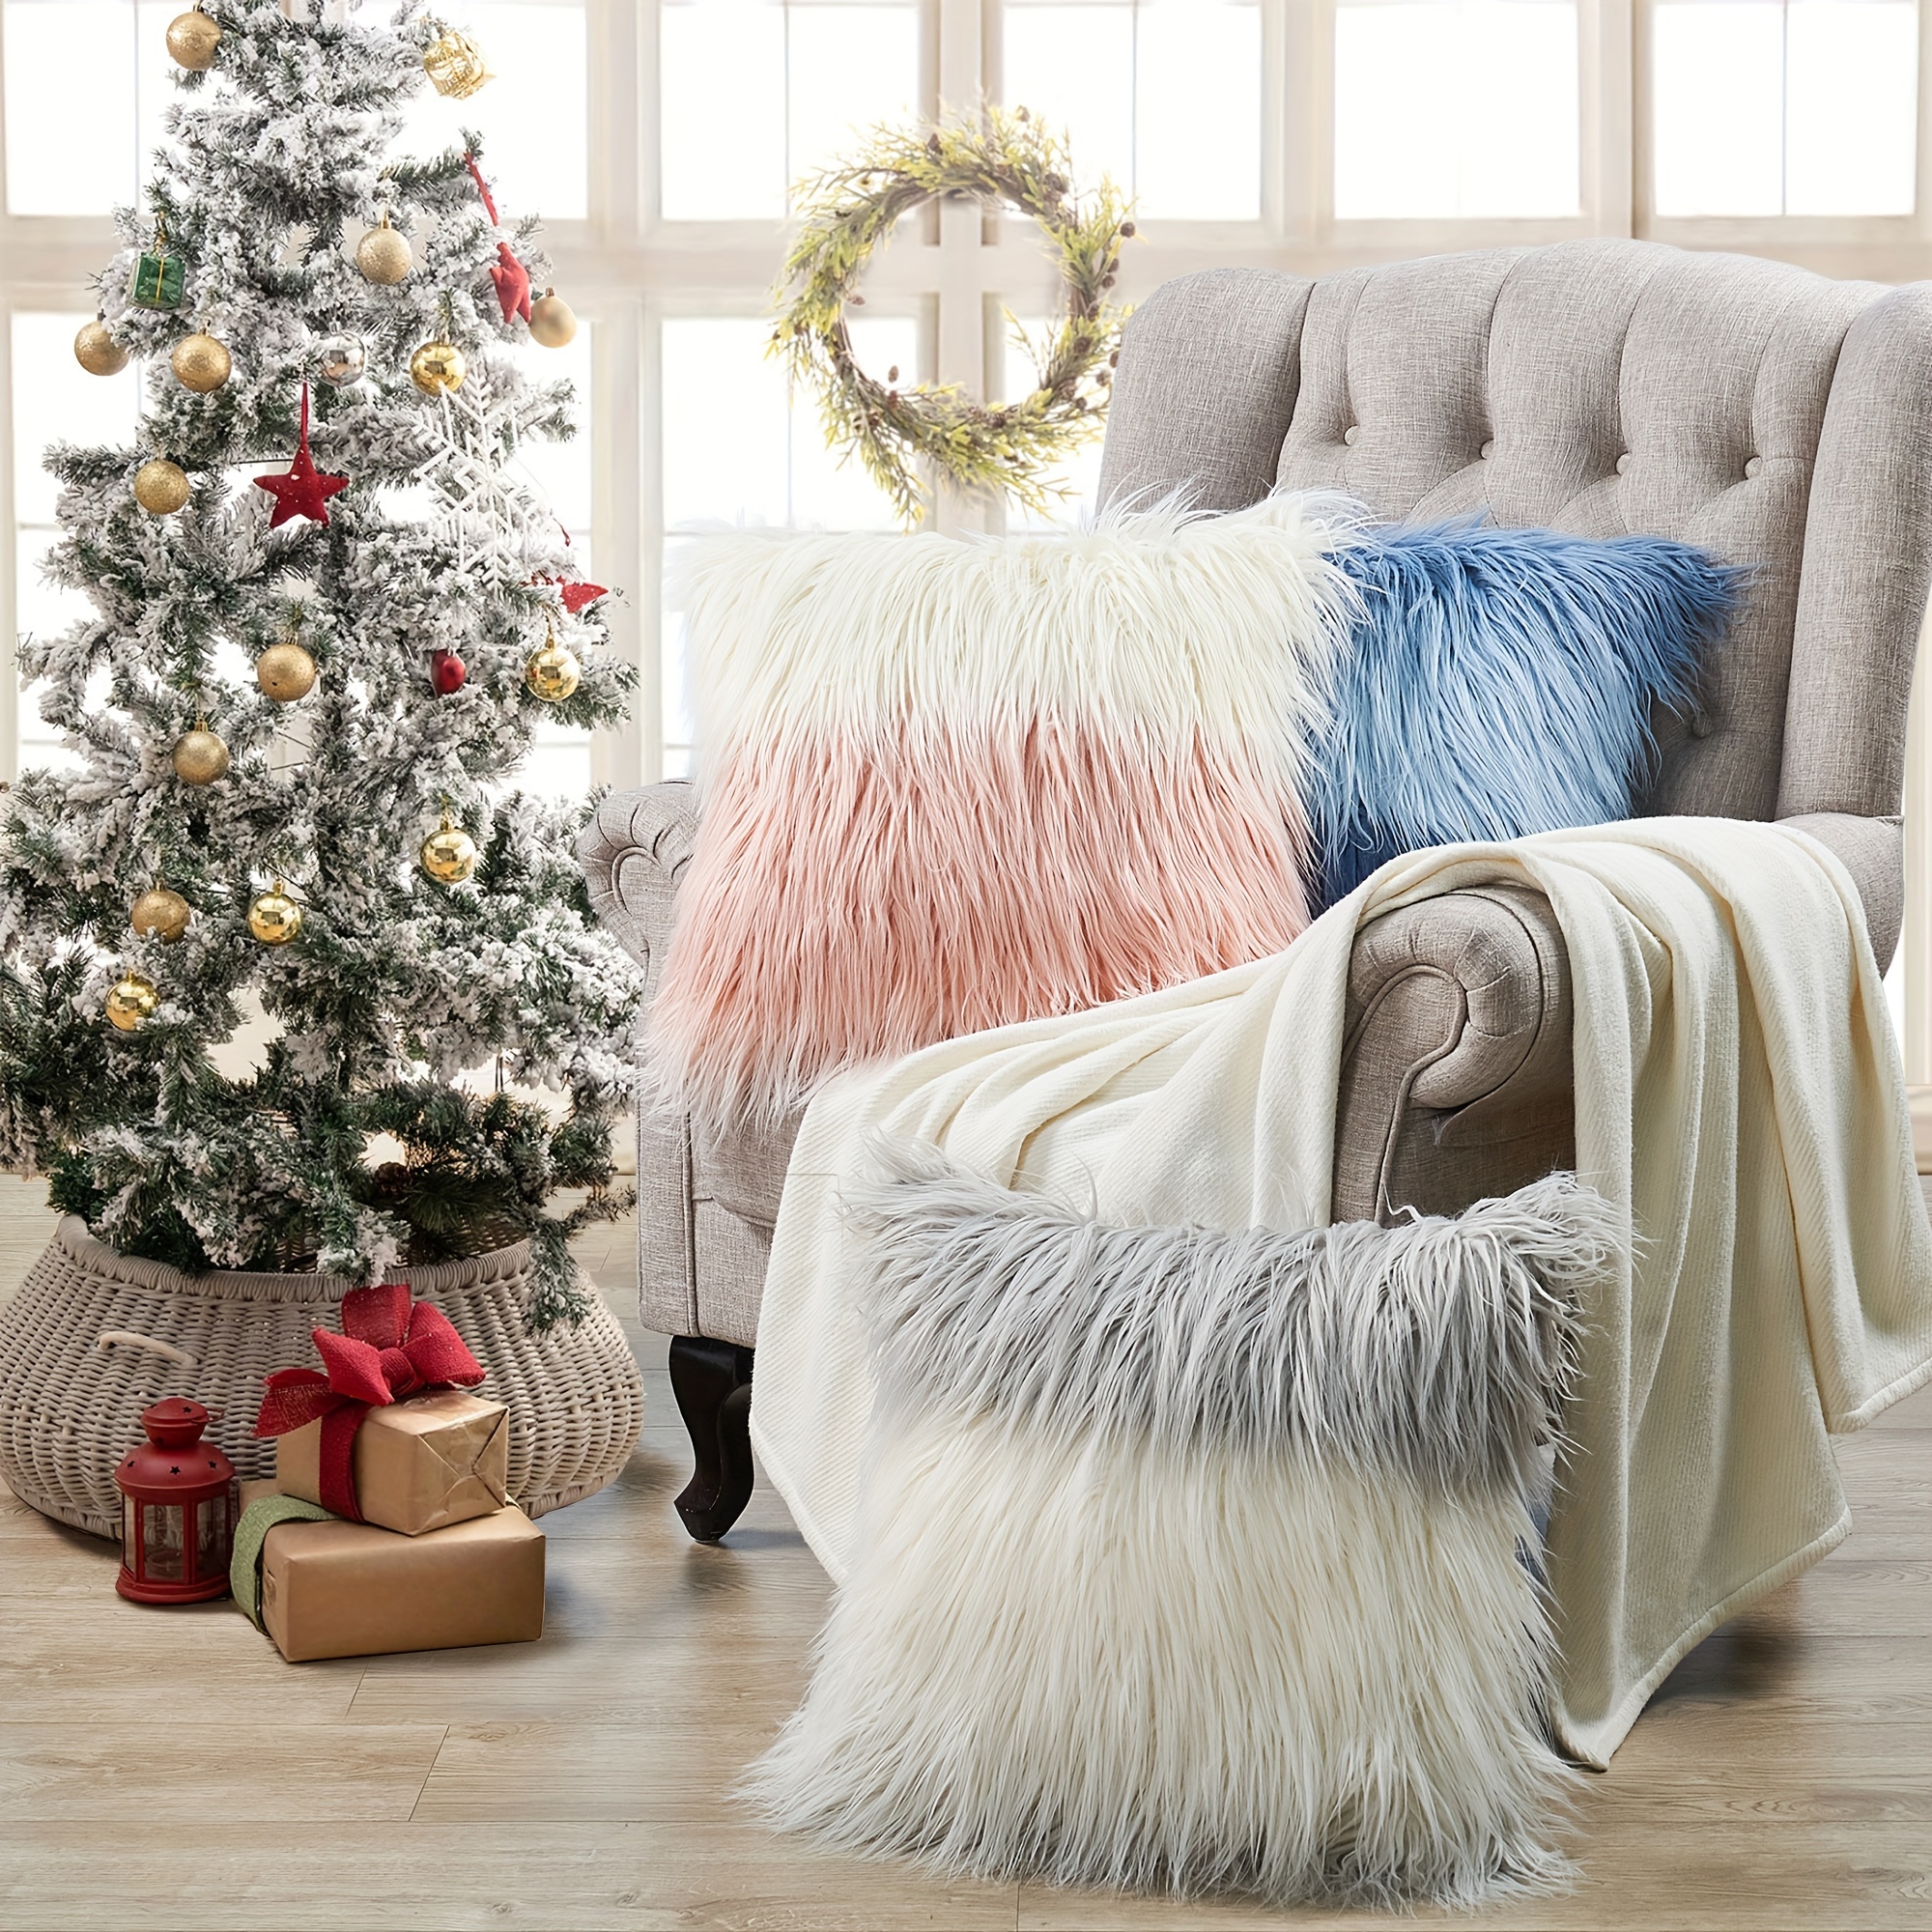 

2pcs, Mongolian Long Pile Faux Fur Throw Pillow Covers Set (no Insert) With Velvet Back, Variegated Colors Plush Soft Furry Fuzzy Decorative Cushion Covers For Couch Sofa Bed Office Car